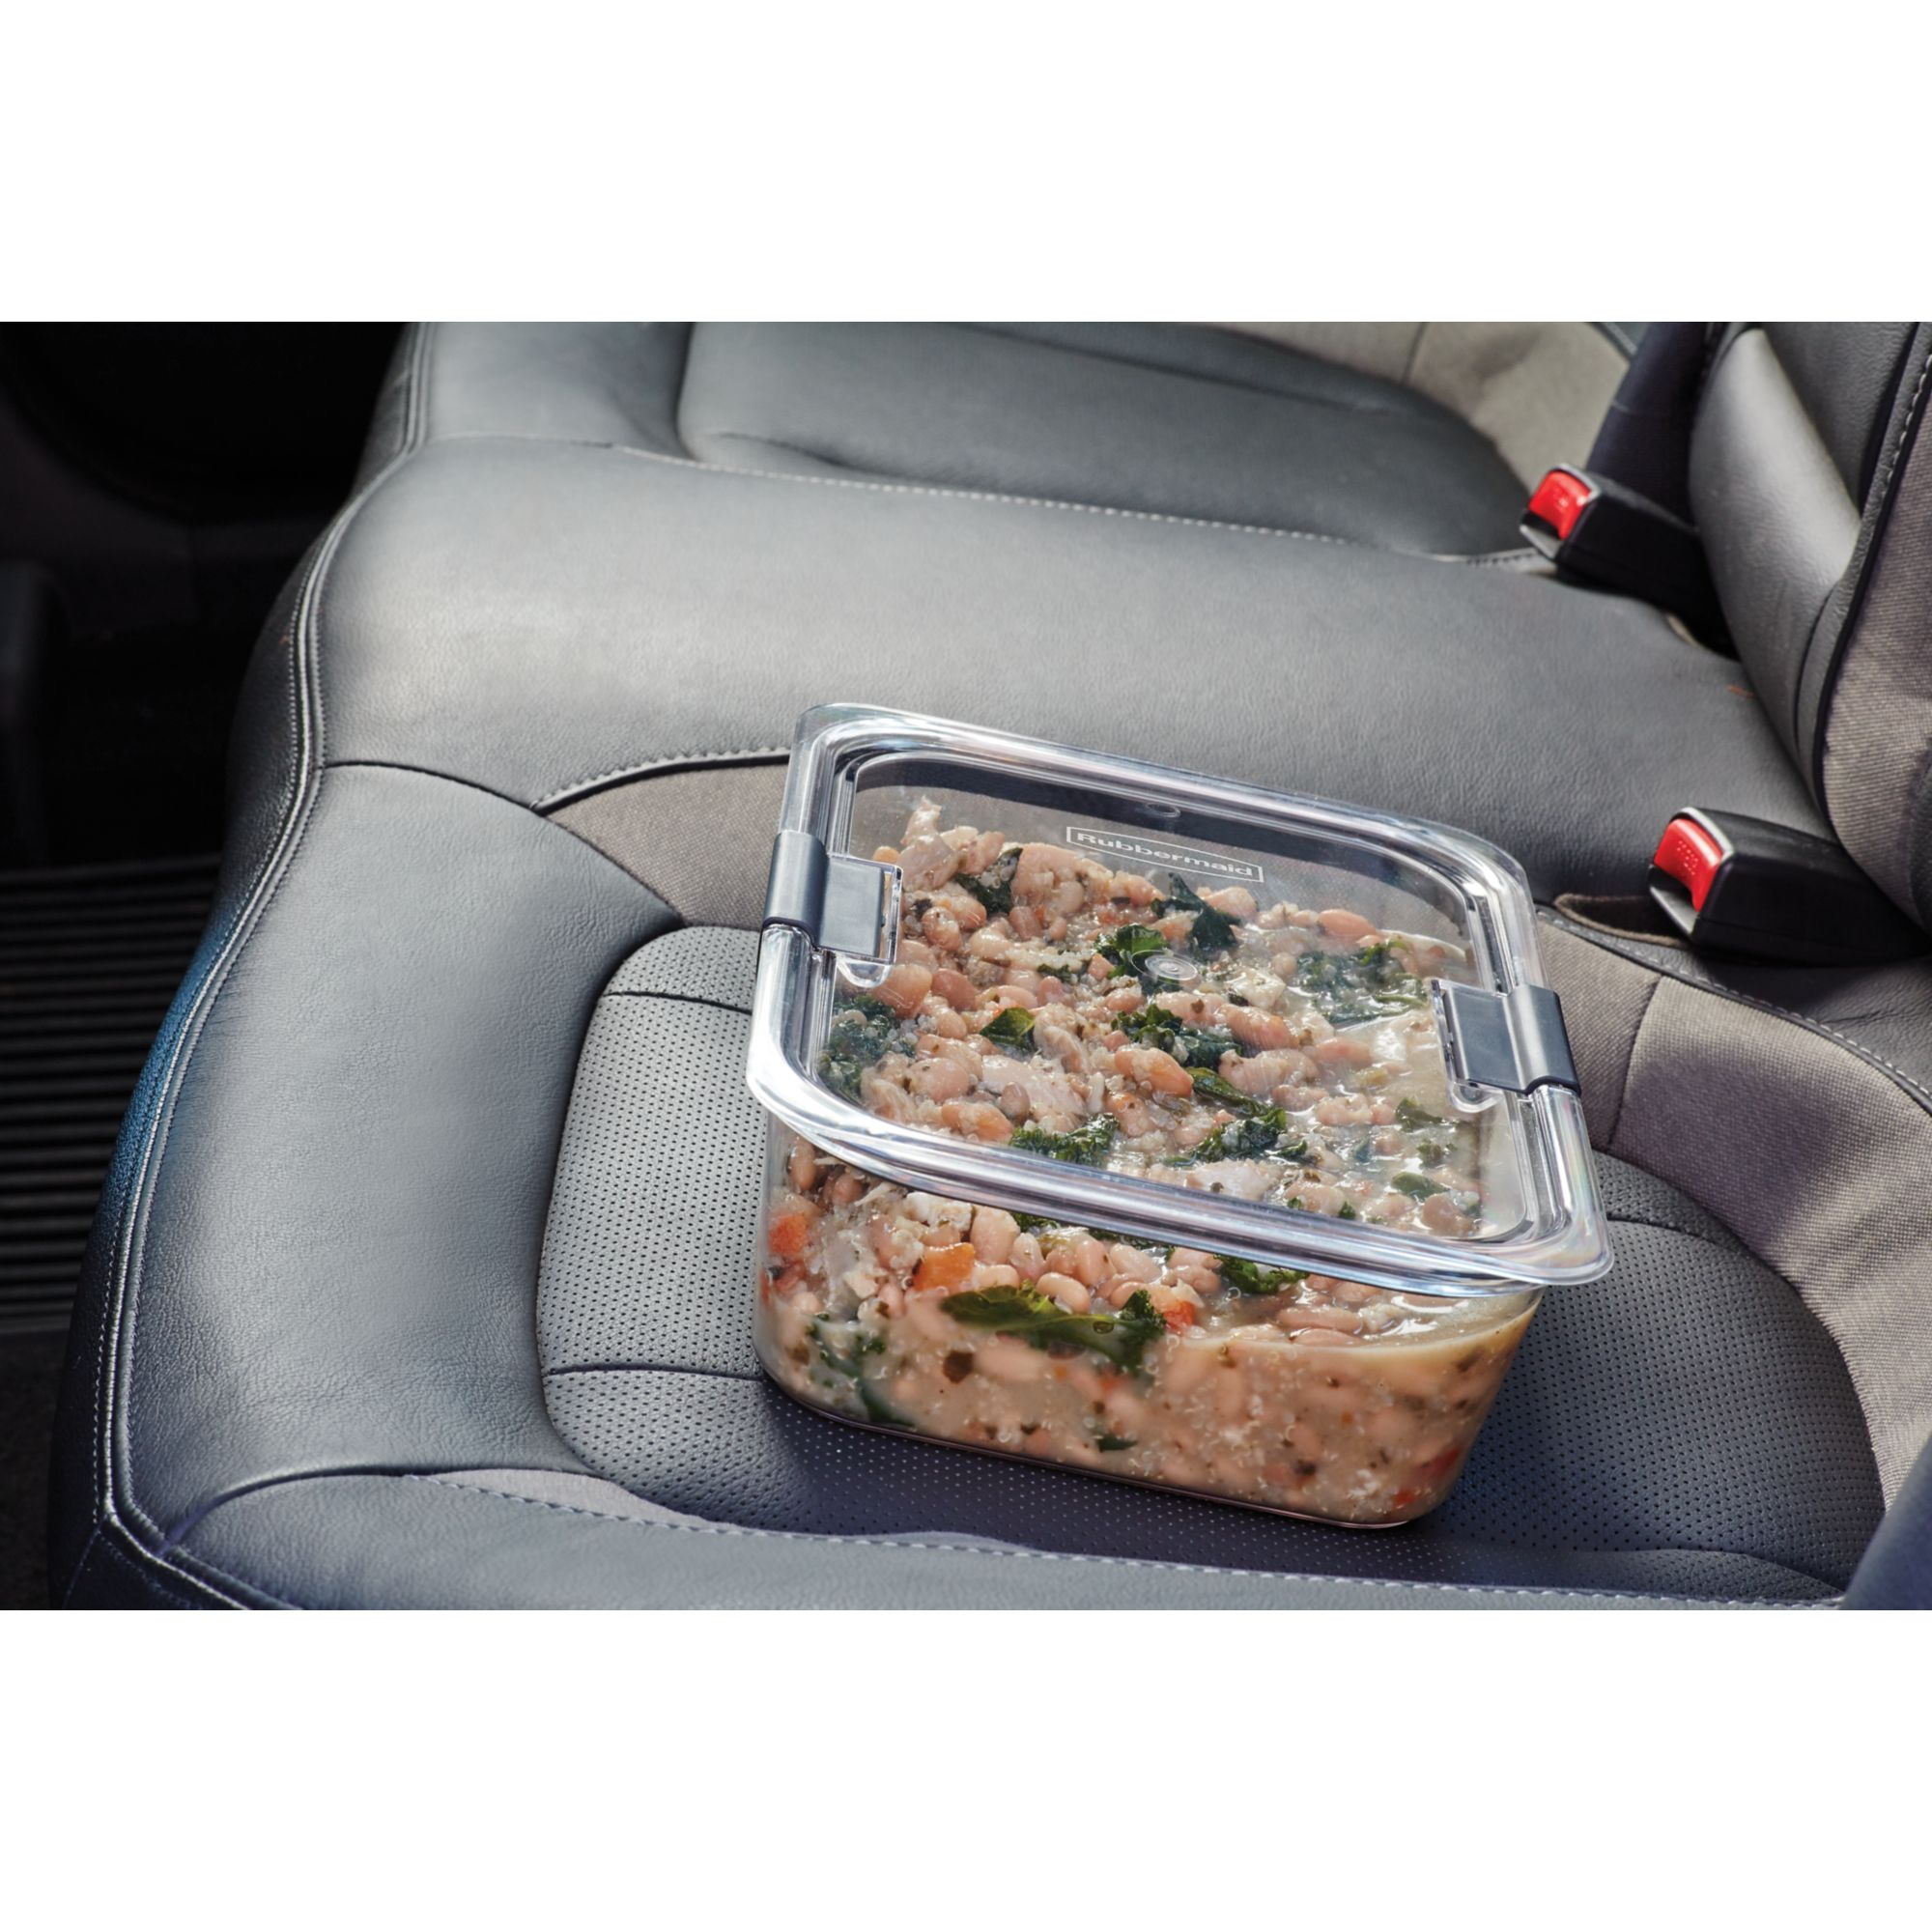 Rubbermaid Brilliance 9.6 C. Clear Rectangle Food Storage Container -  Farr's Hardware